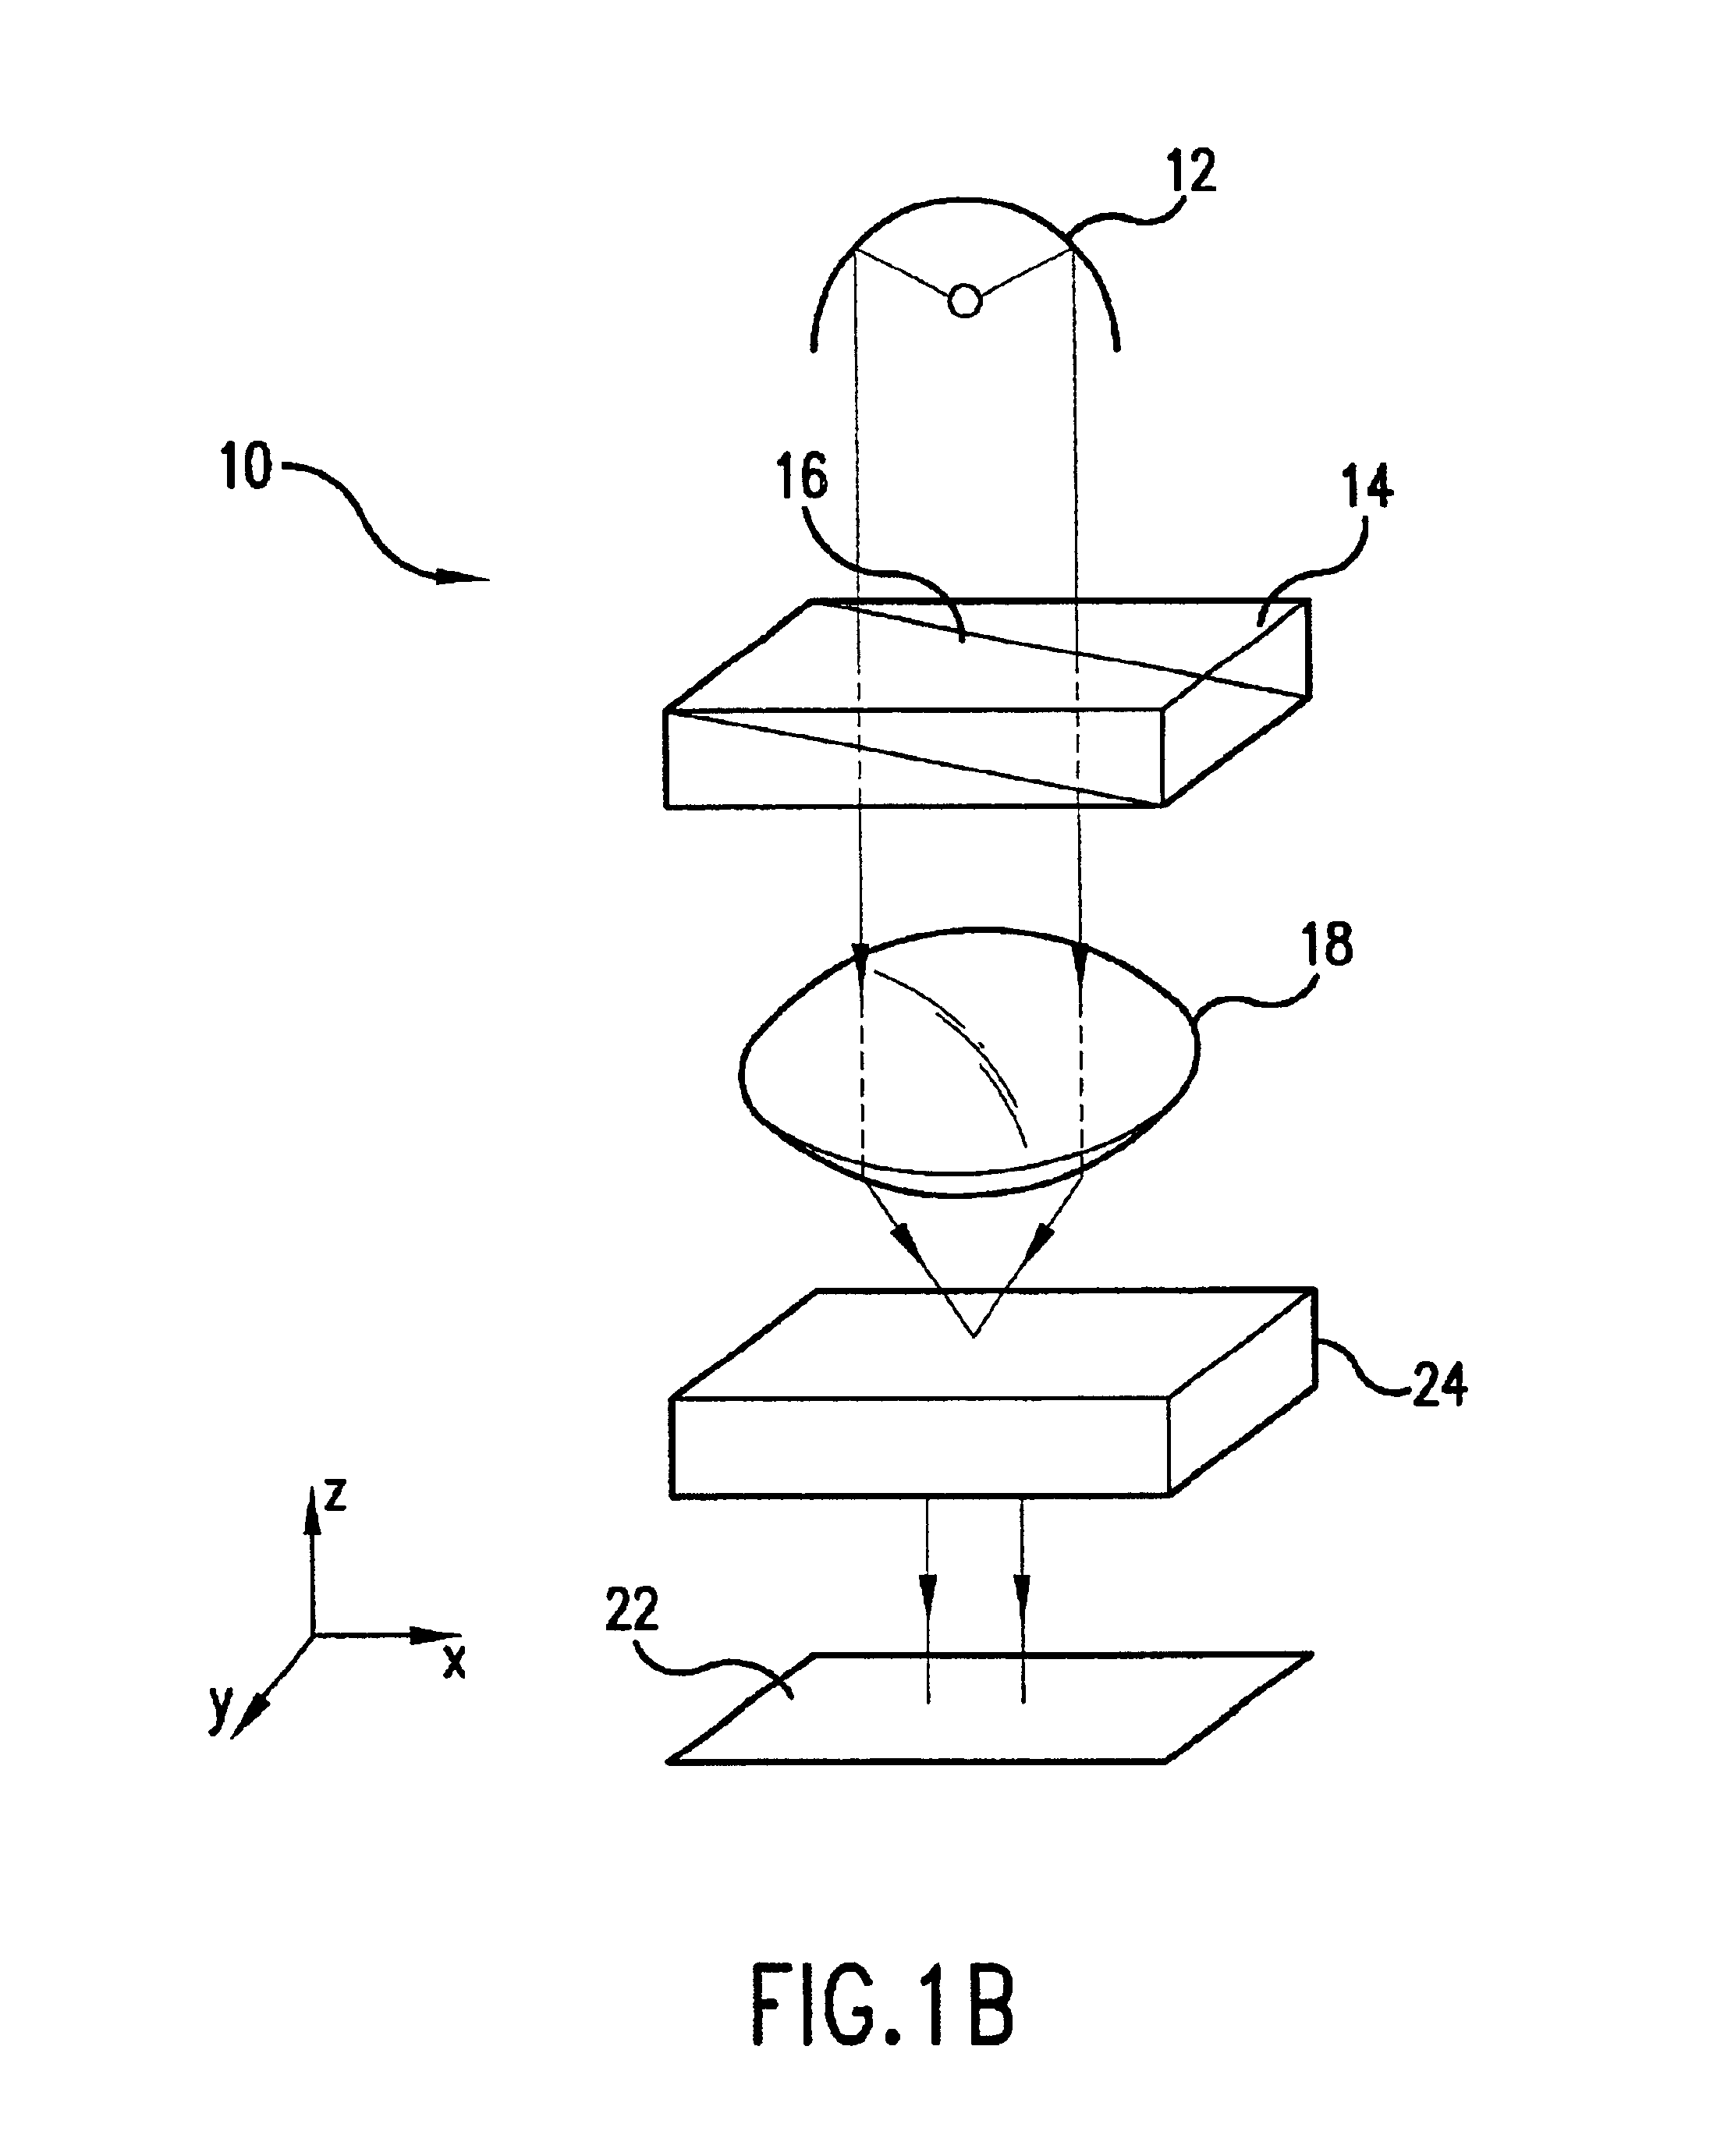 Method for characterizing optical systems using holographic reticles